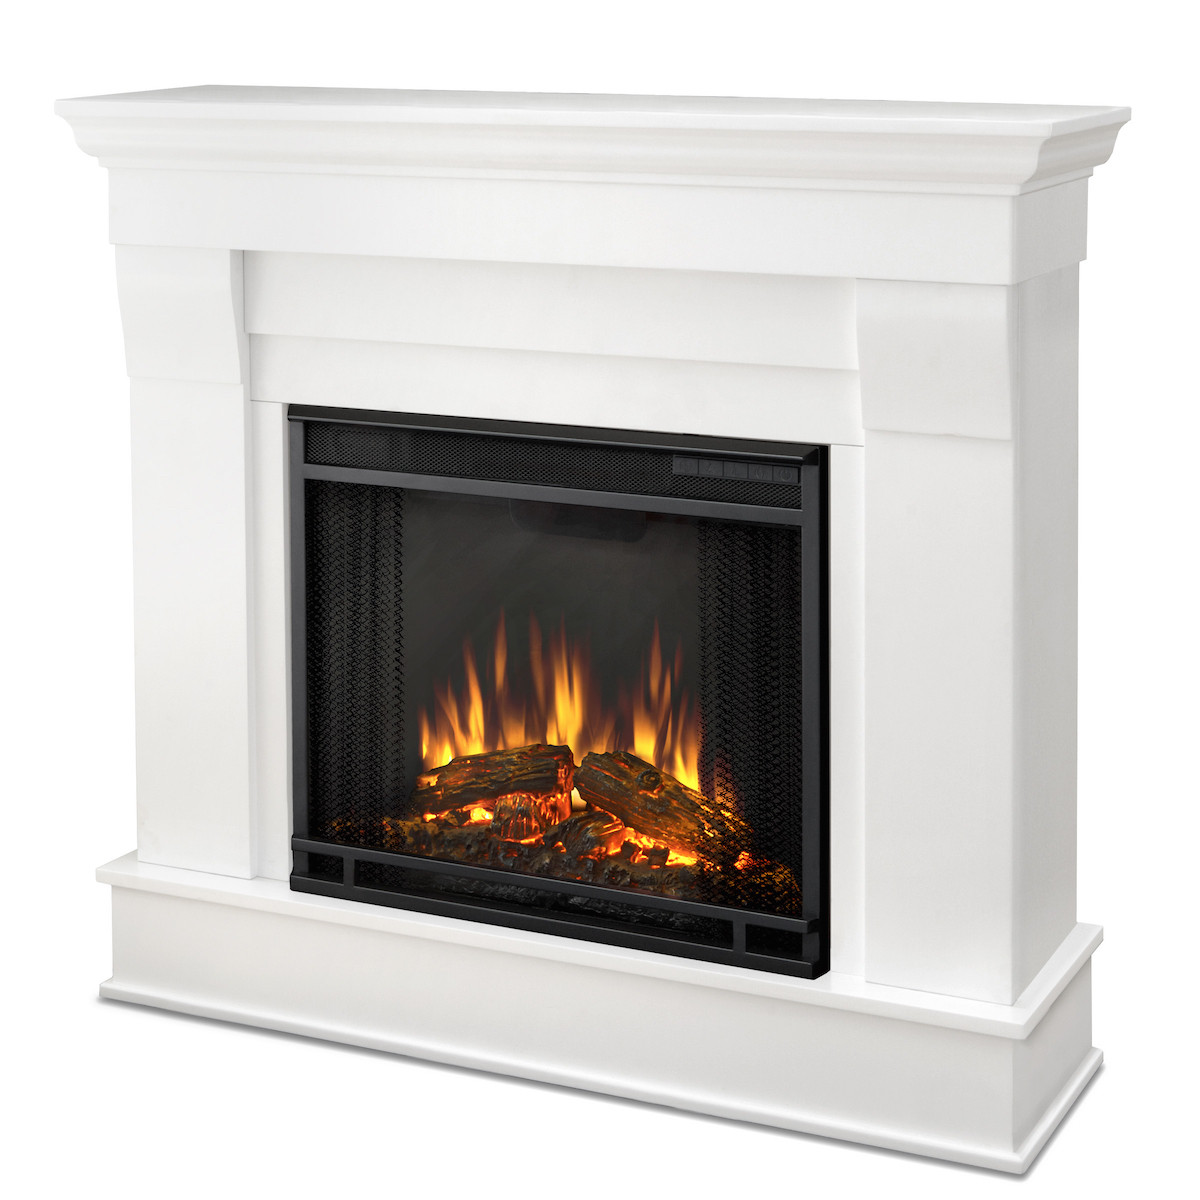 Real Flame White Electric Fireplace
 Real Flame Chateau Electric Fireplace in White